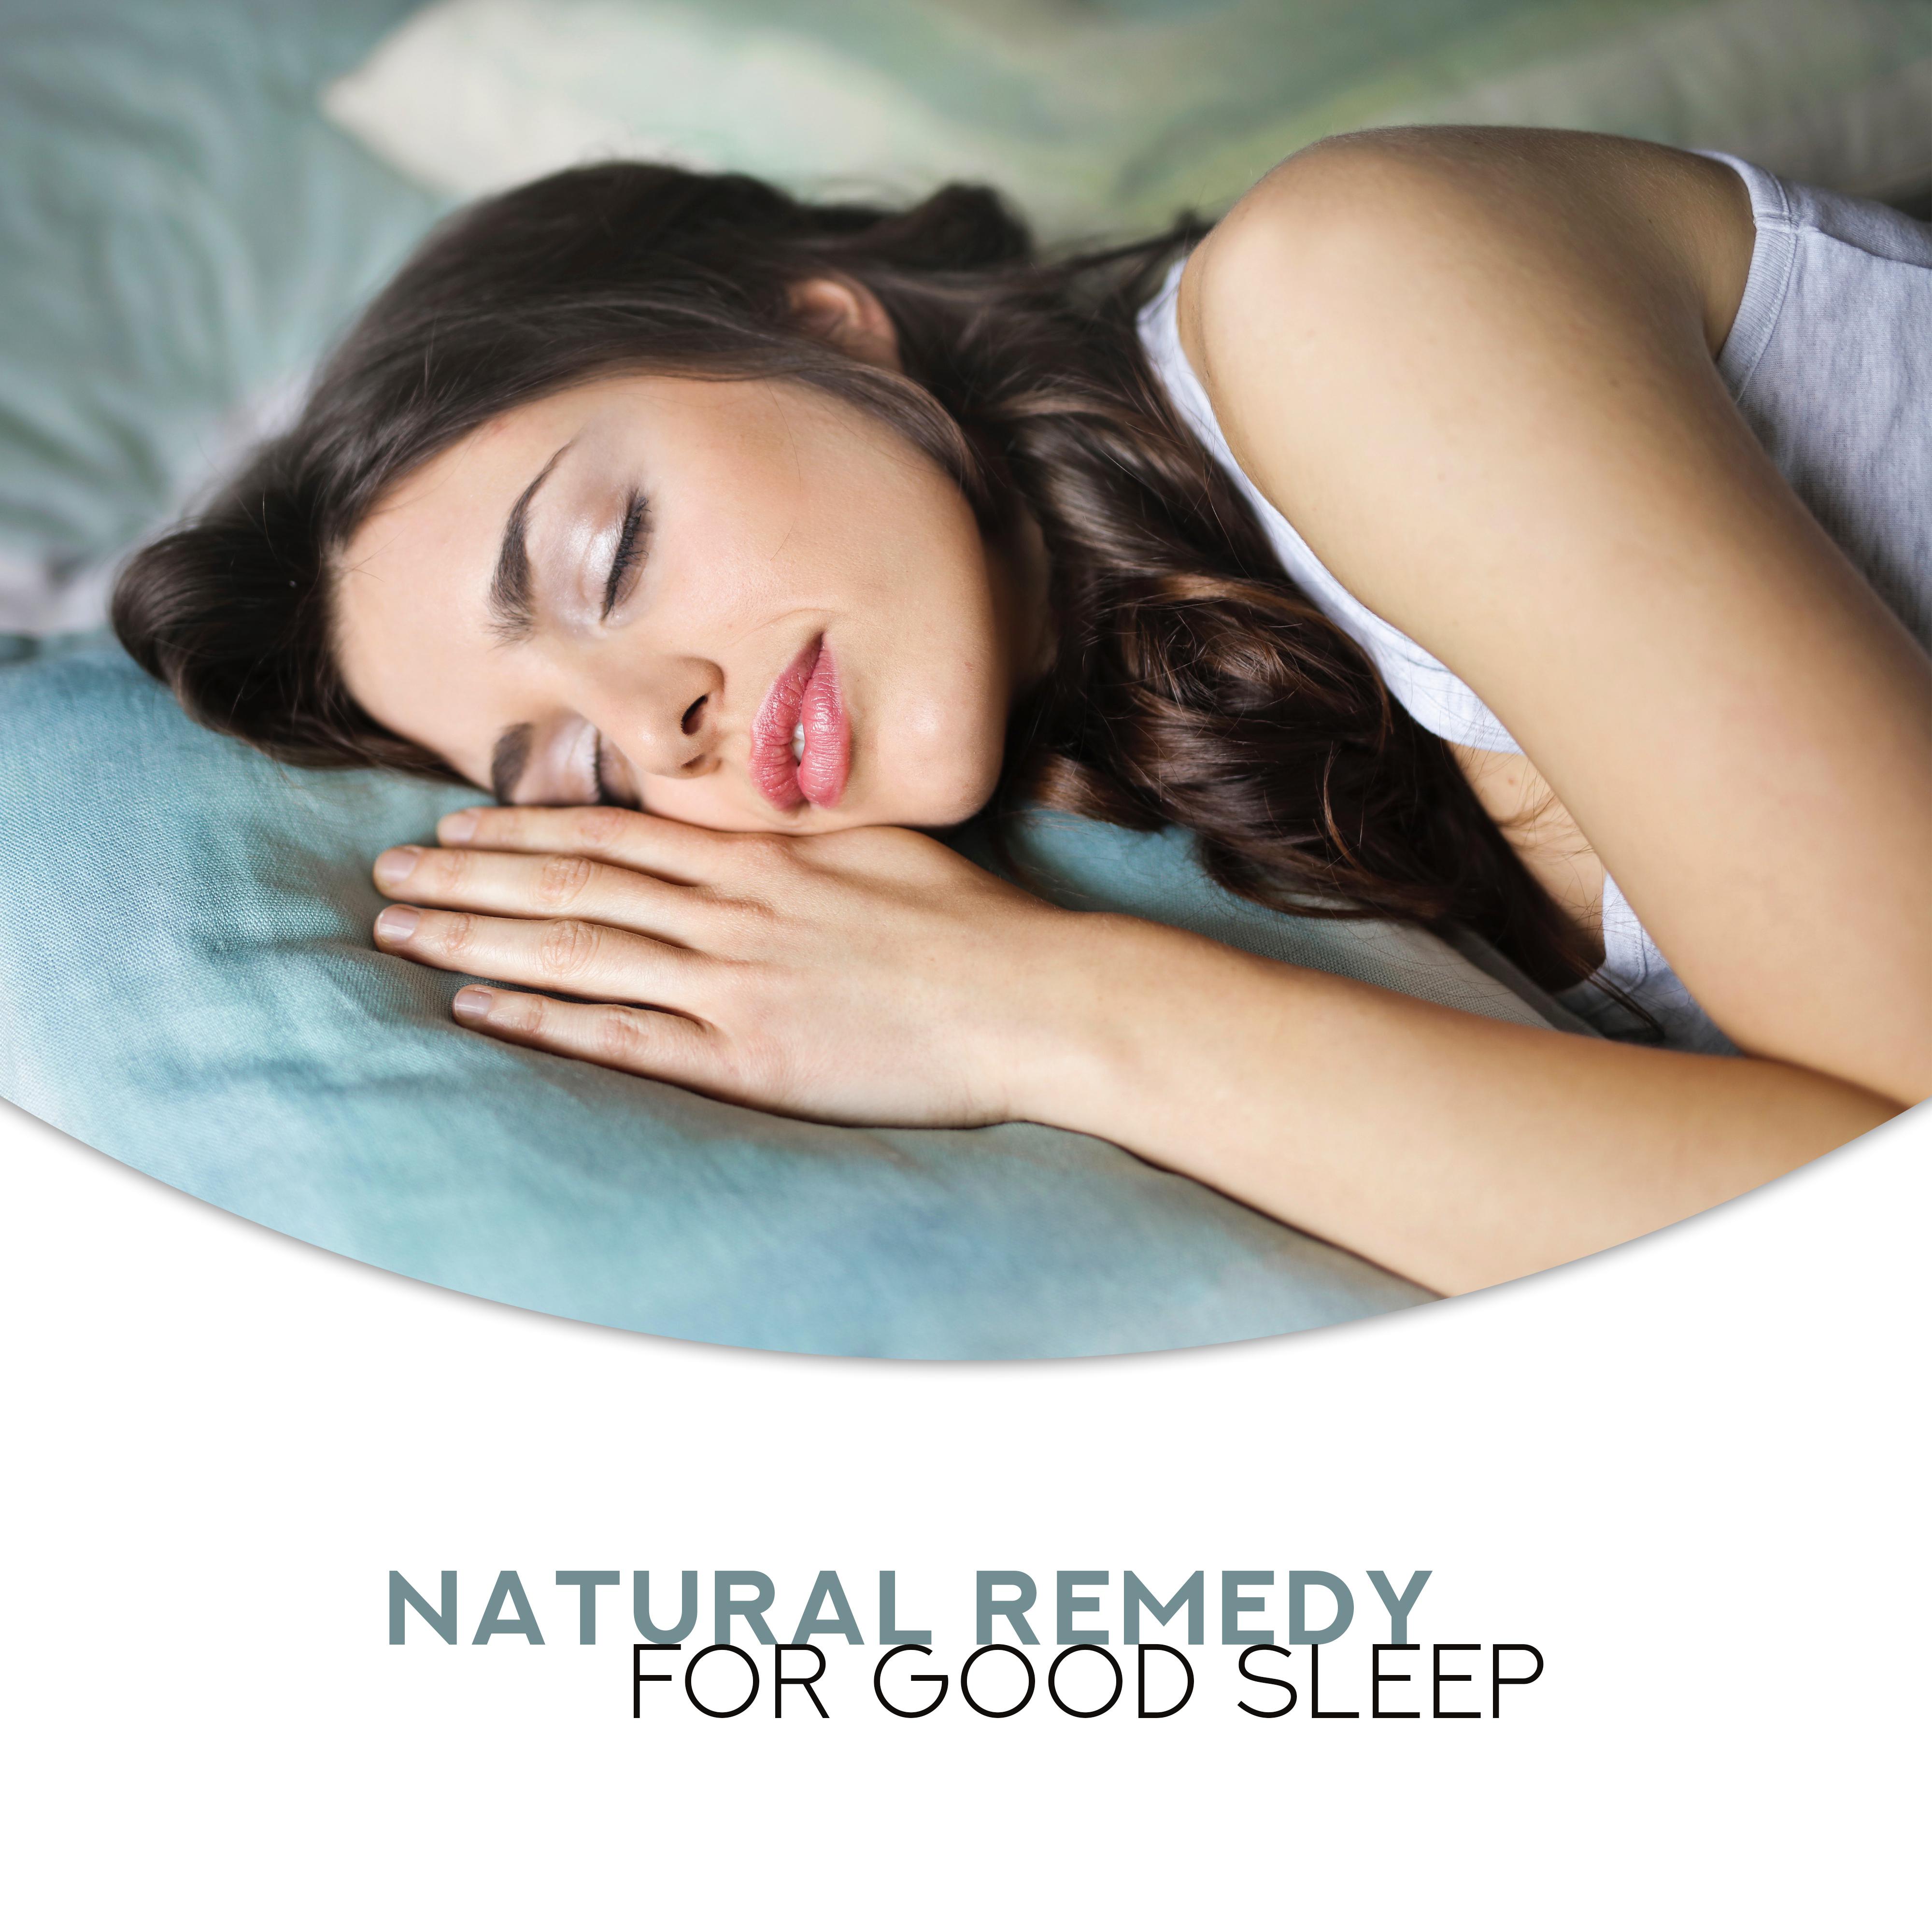 Natural Remedy for Good Sleep: 15 New Age Soothing Songs for Evening Relax, De-Stress & Sleep All Night Long